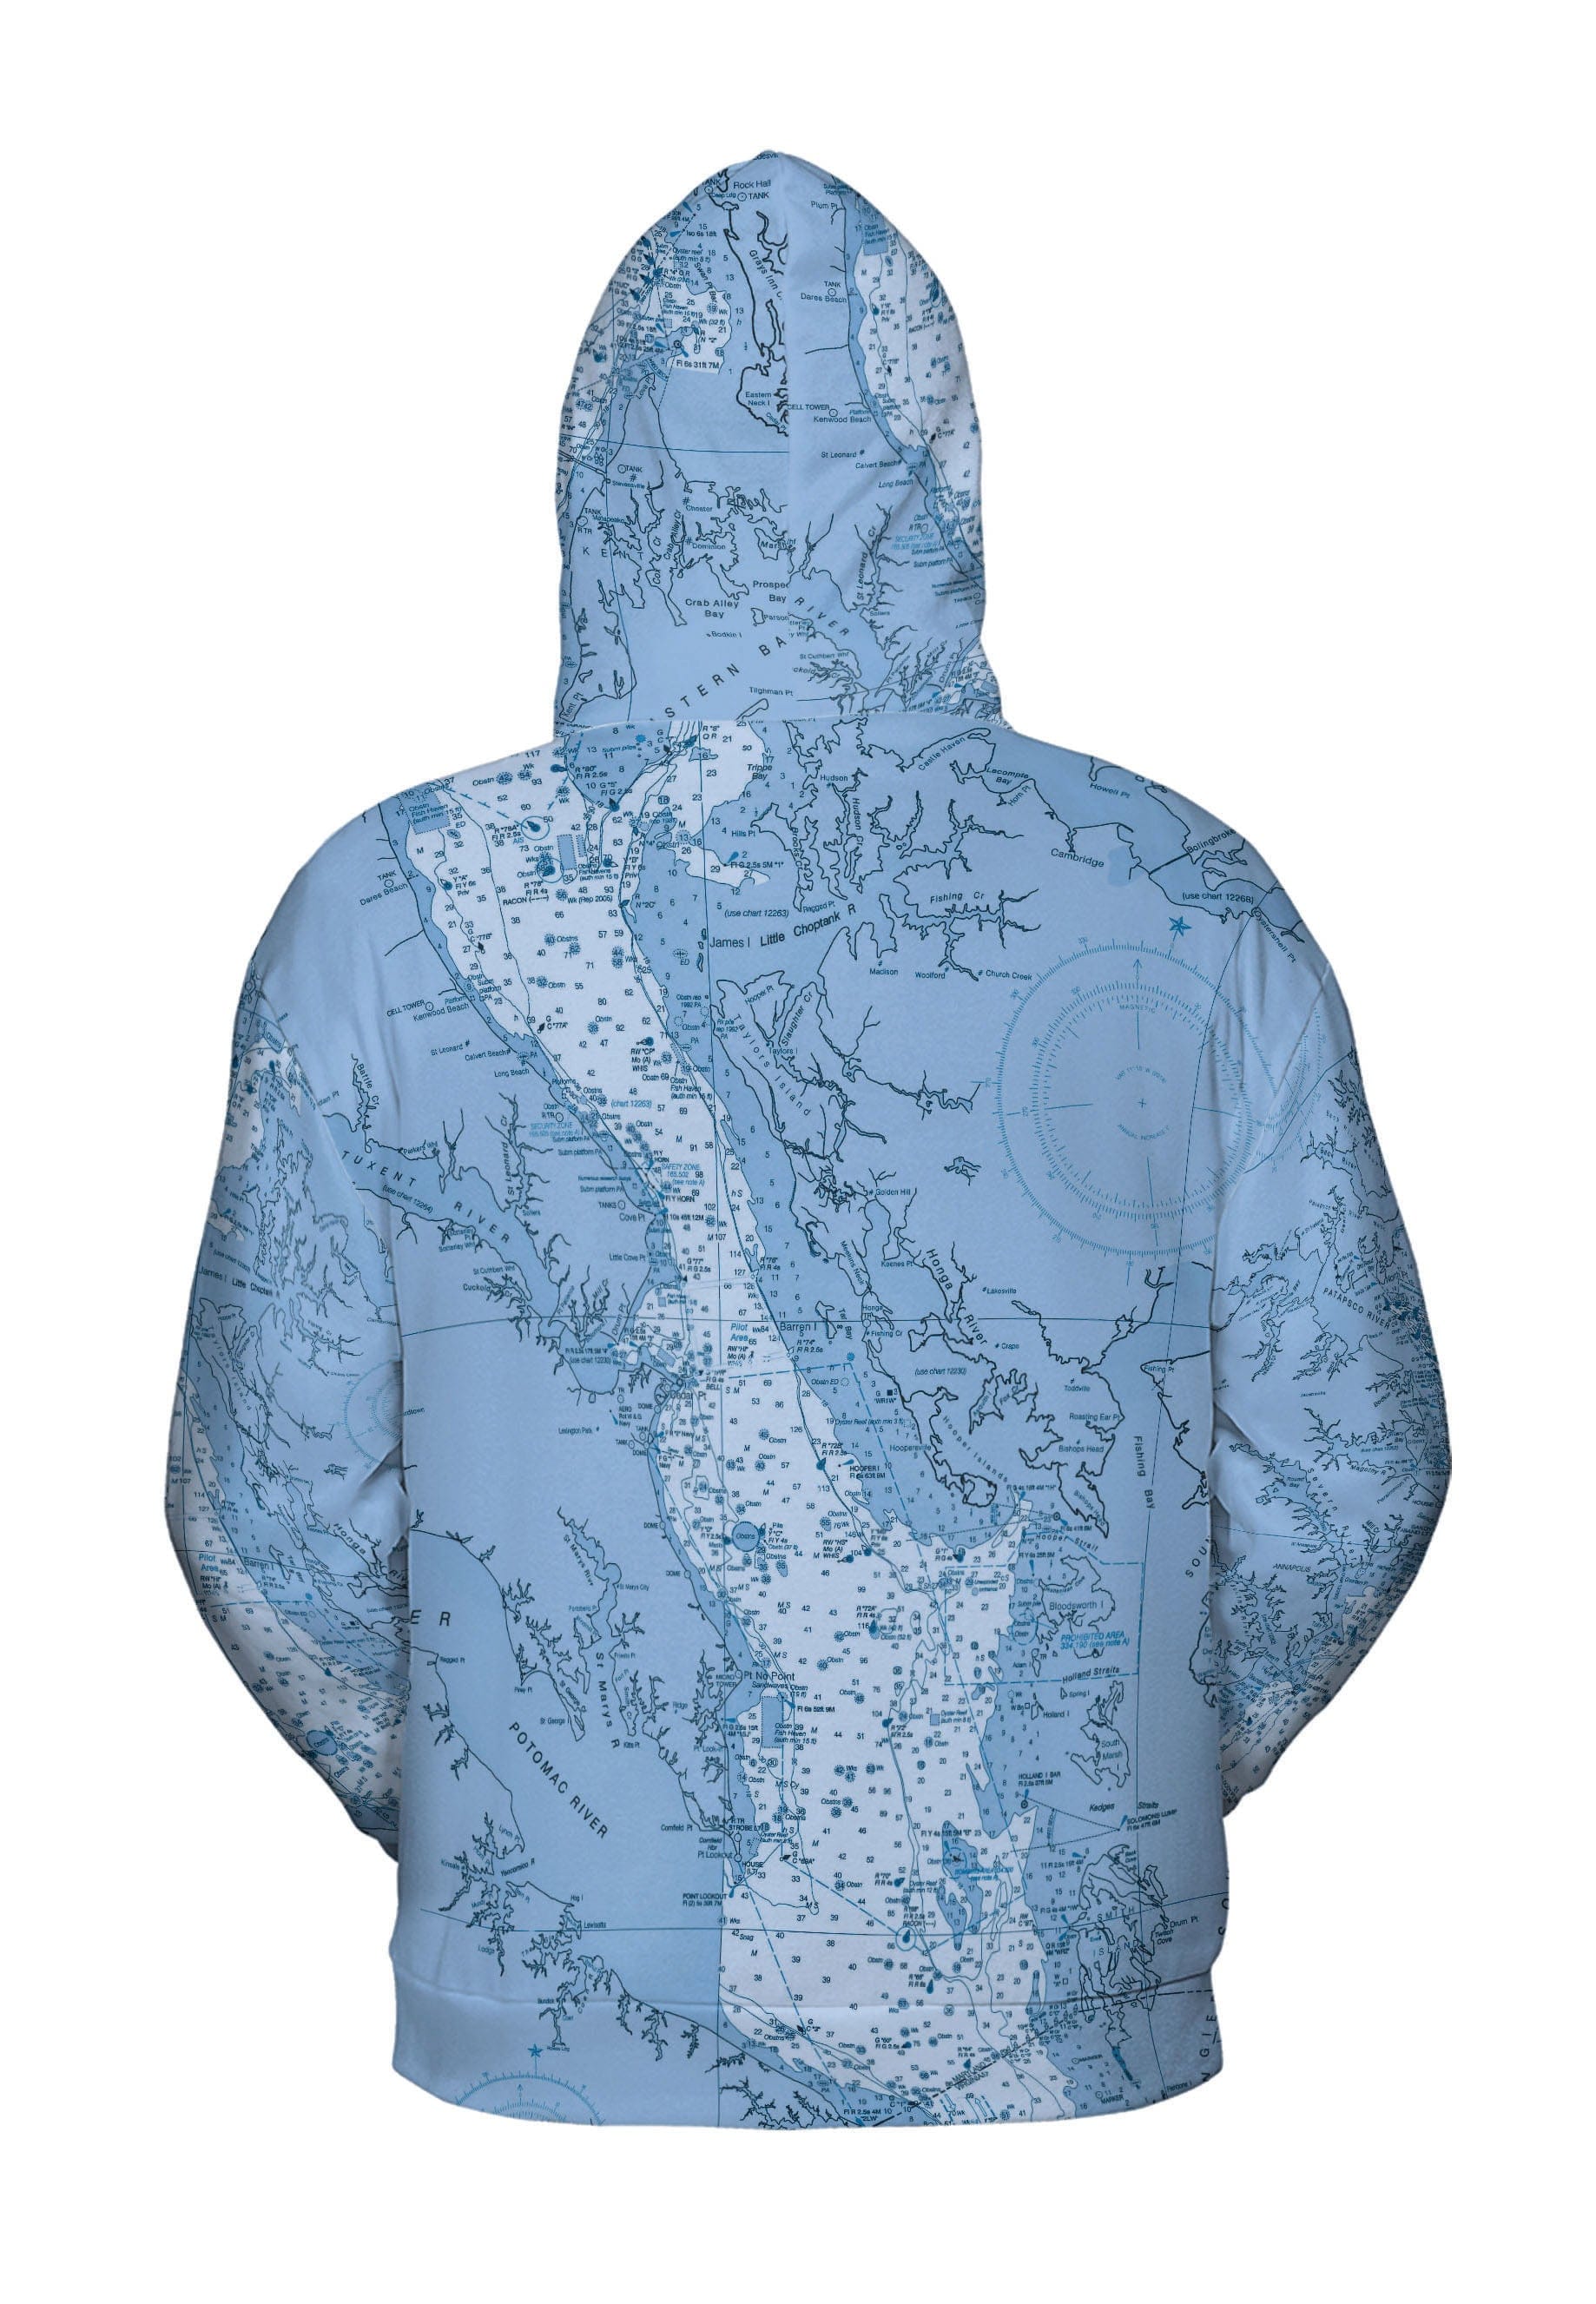 The Upper and Middle Chesapeake Bay Blues Lightweight Hoodie